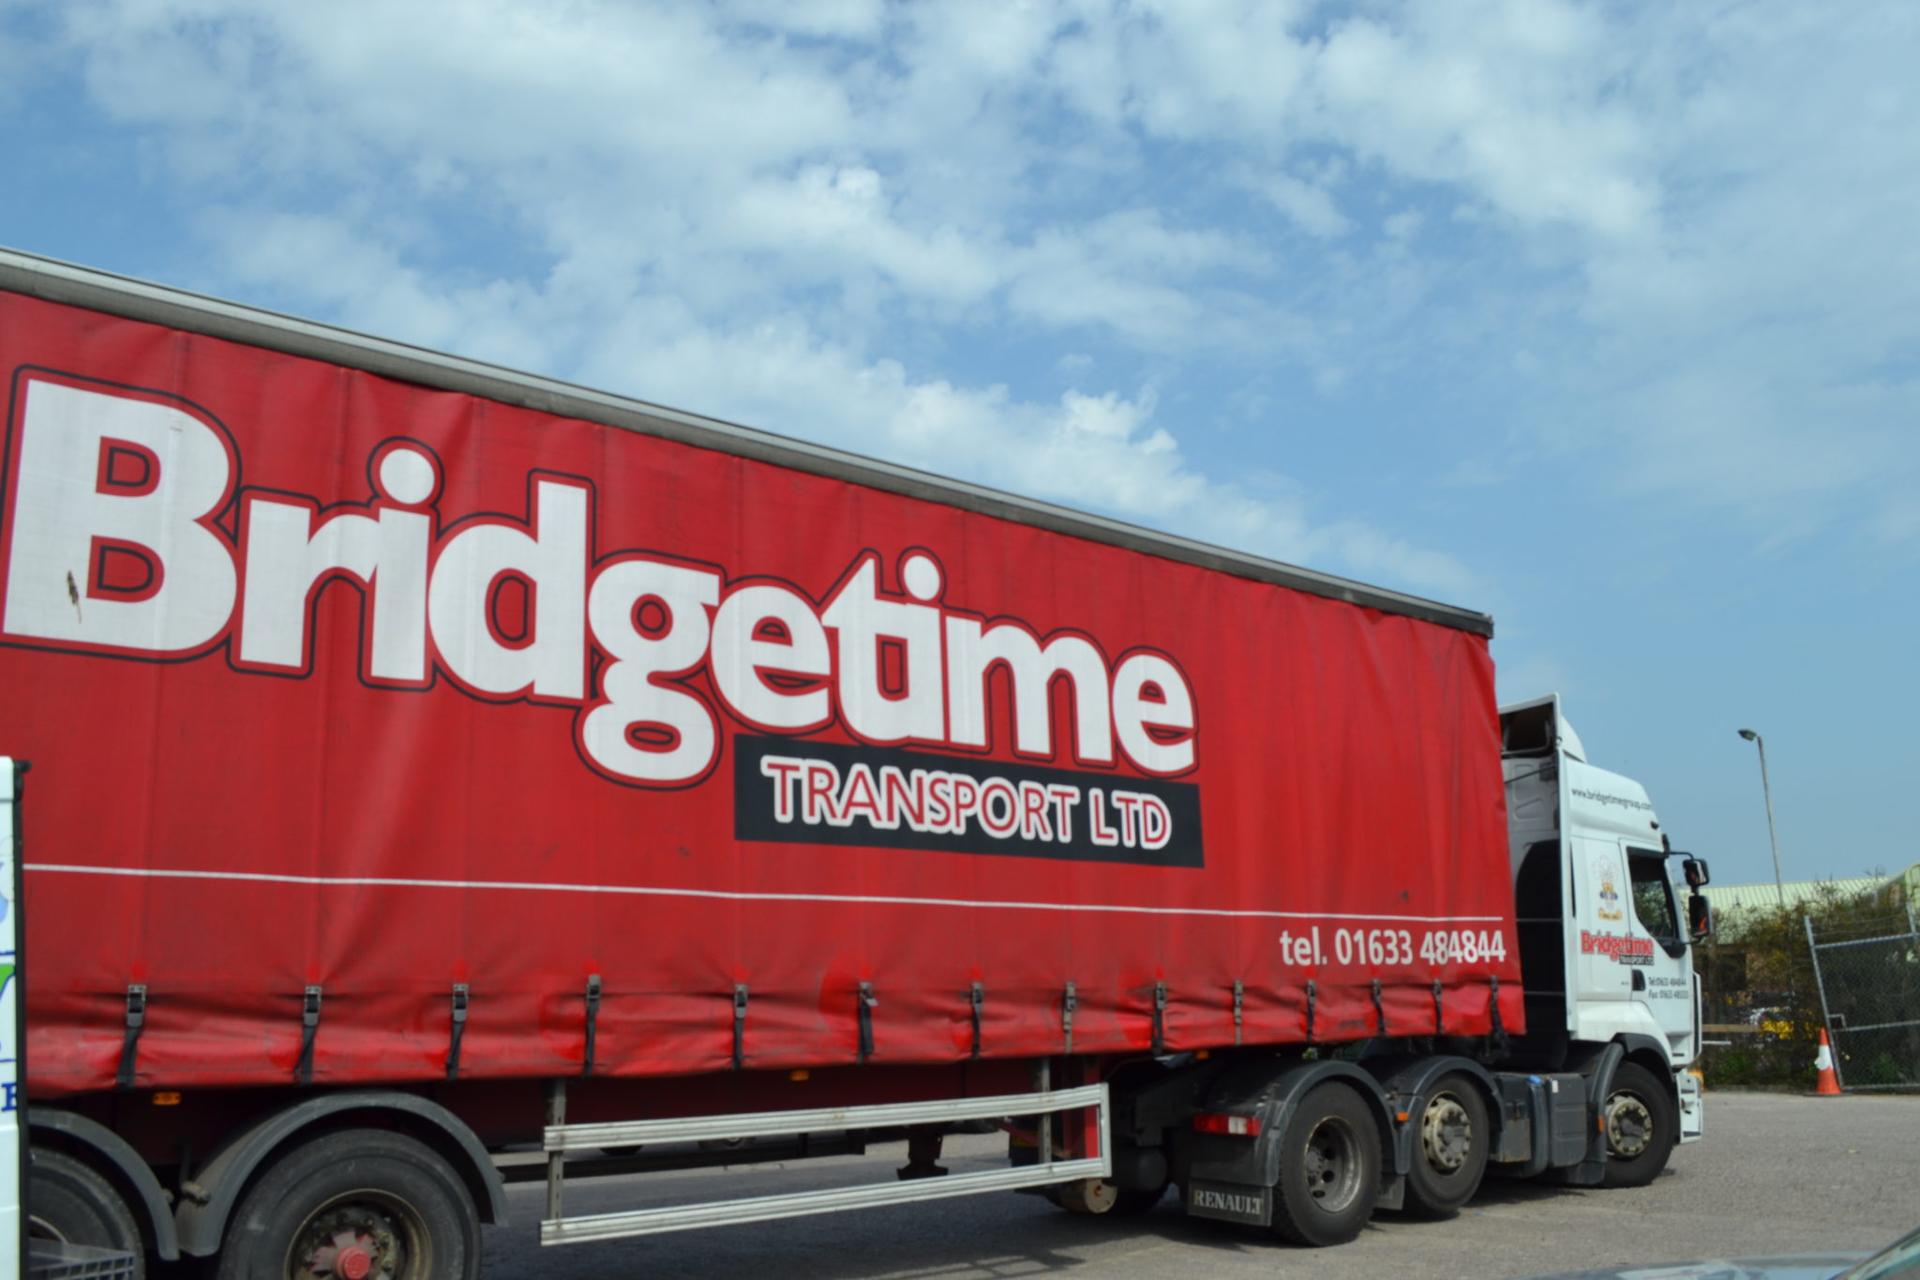 South Wales haulage firm falls into administration